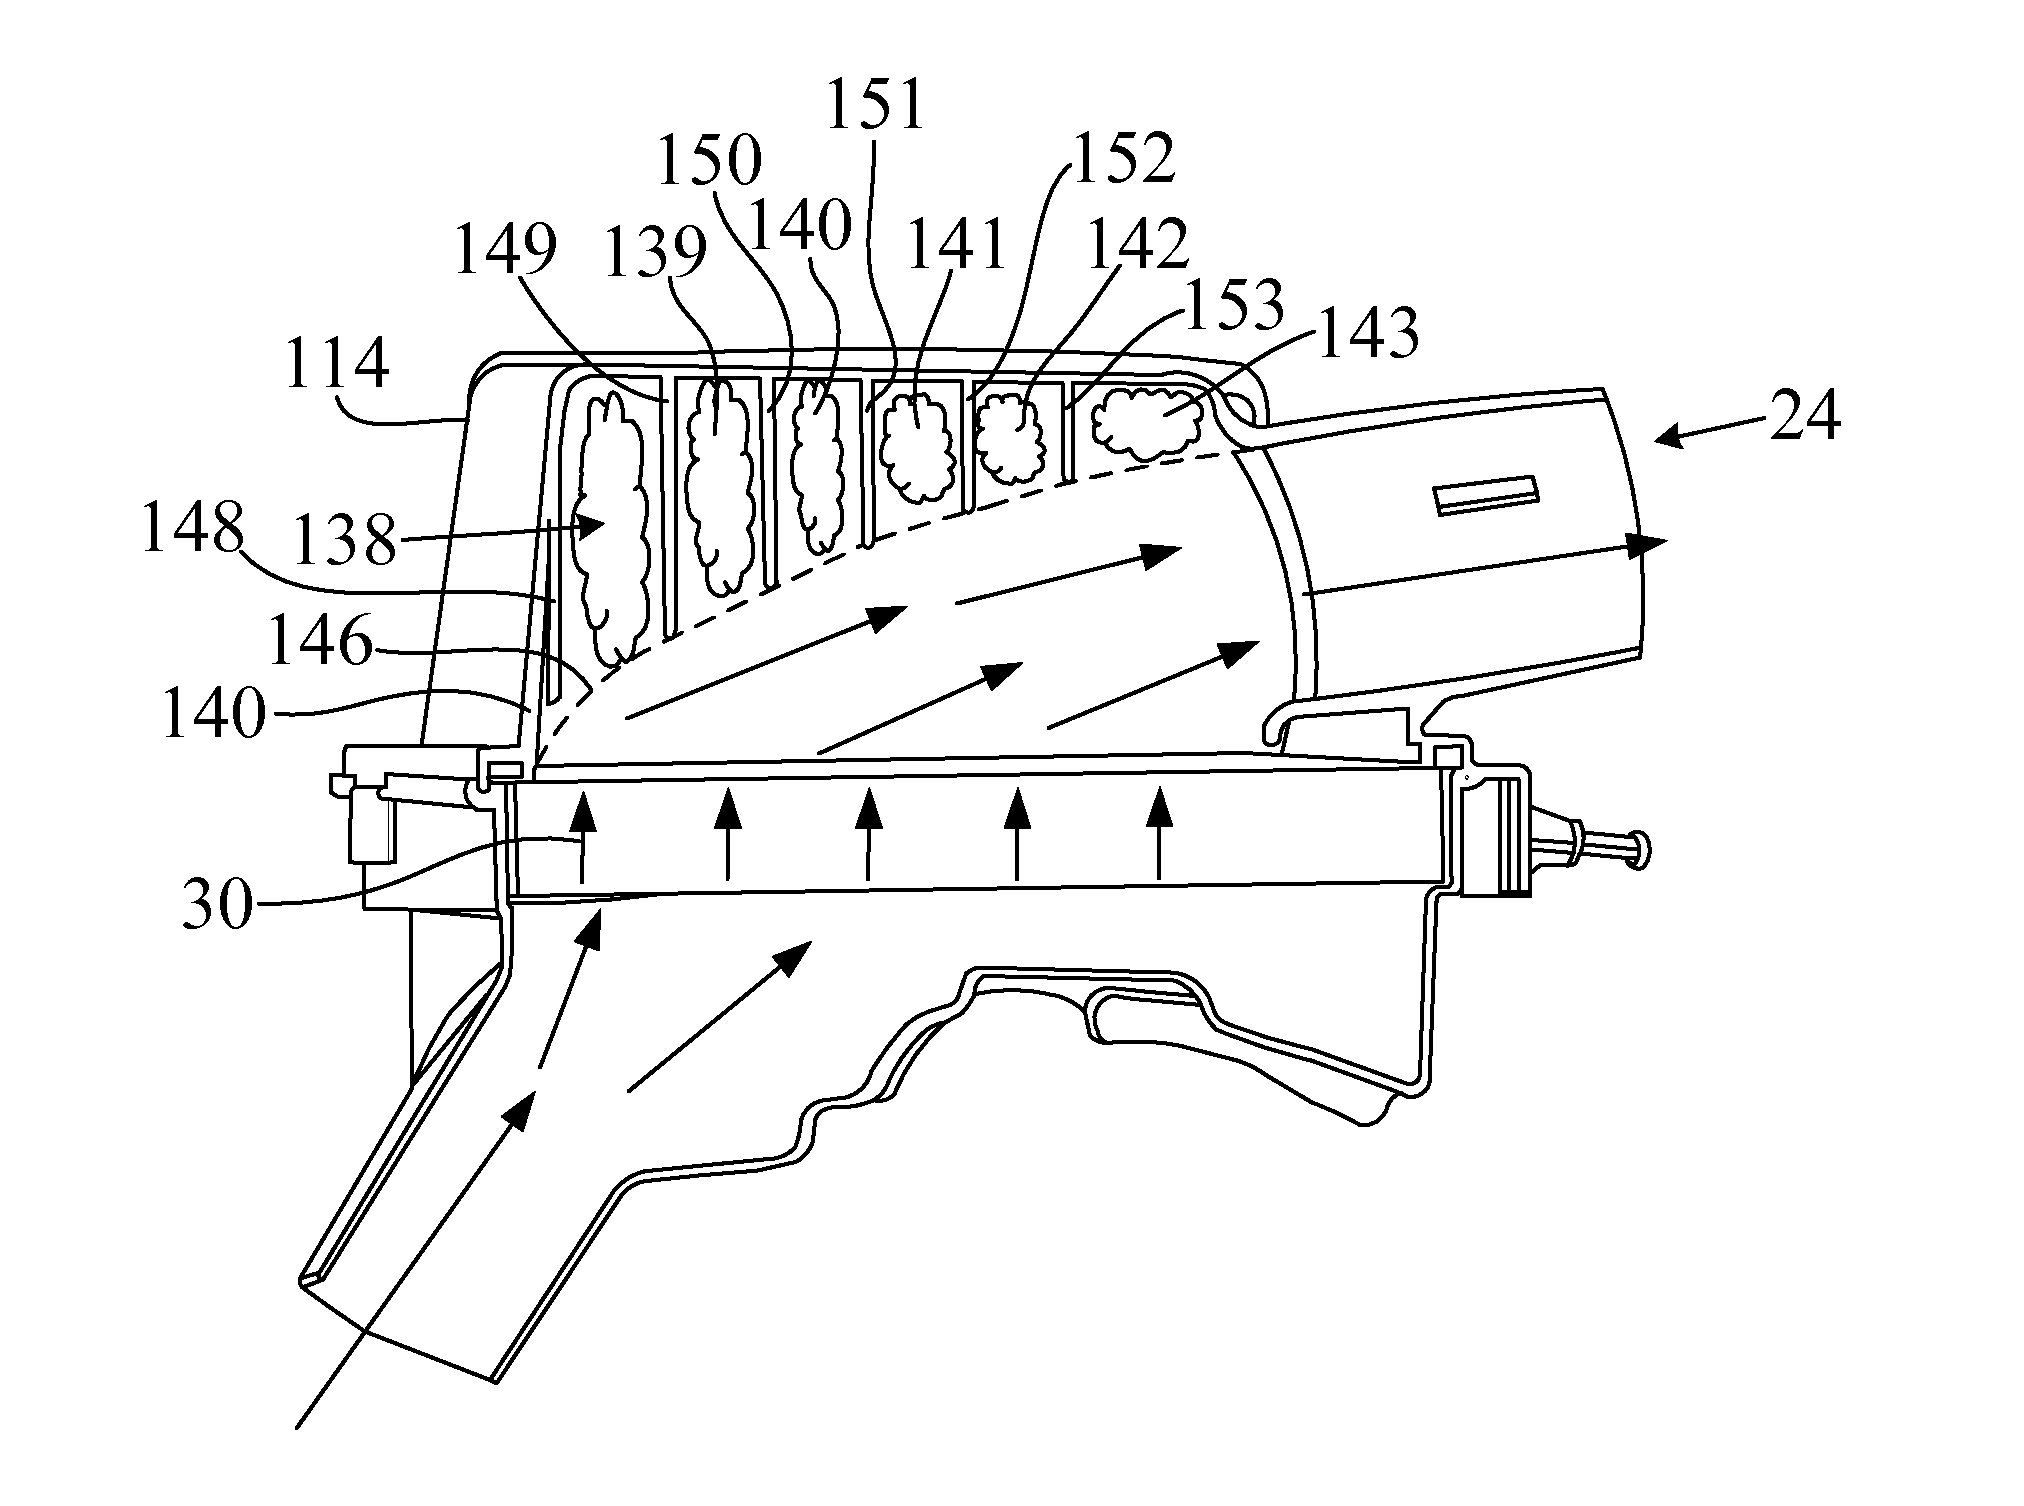 Air pillow flow guidance and acoustic countermeasure system for an air intake tract